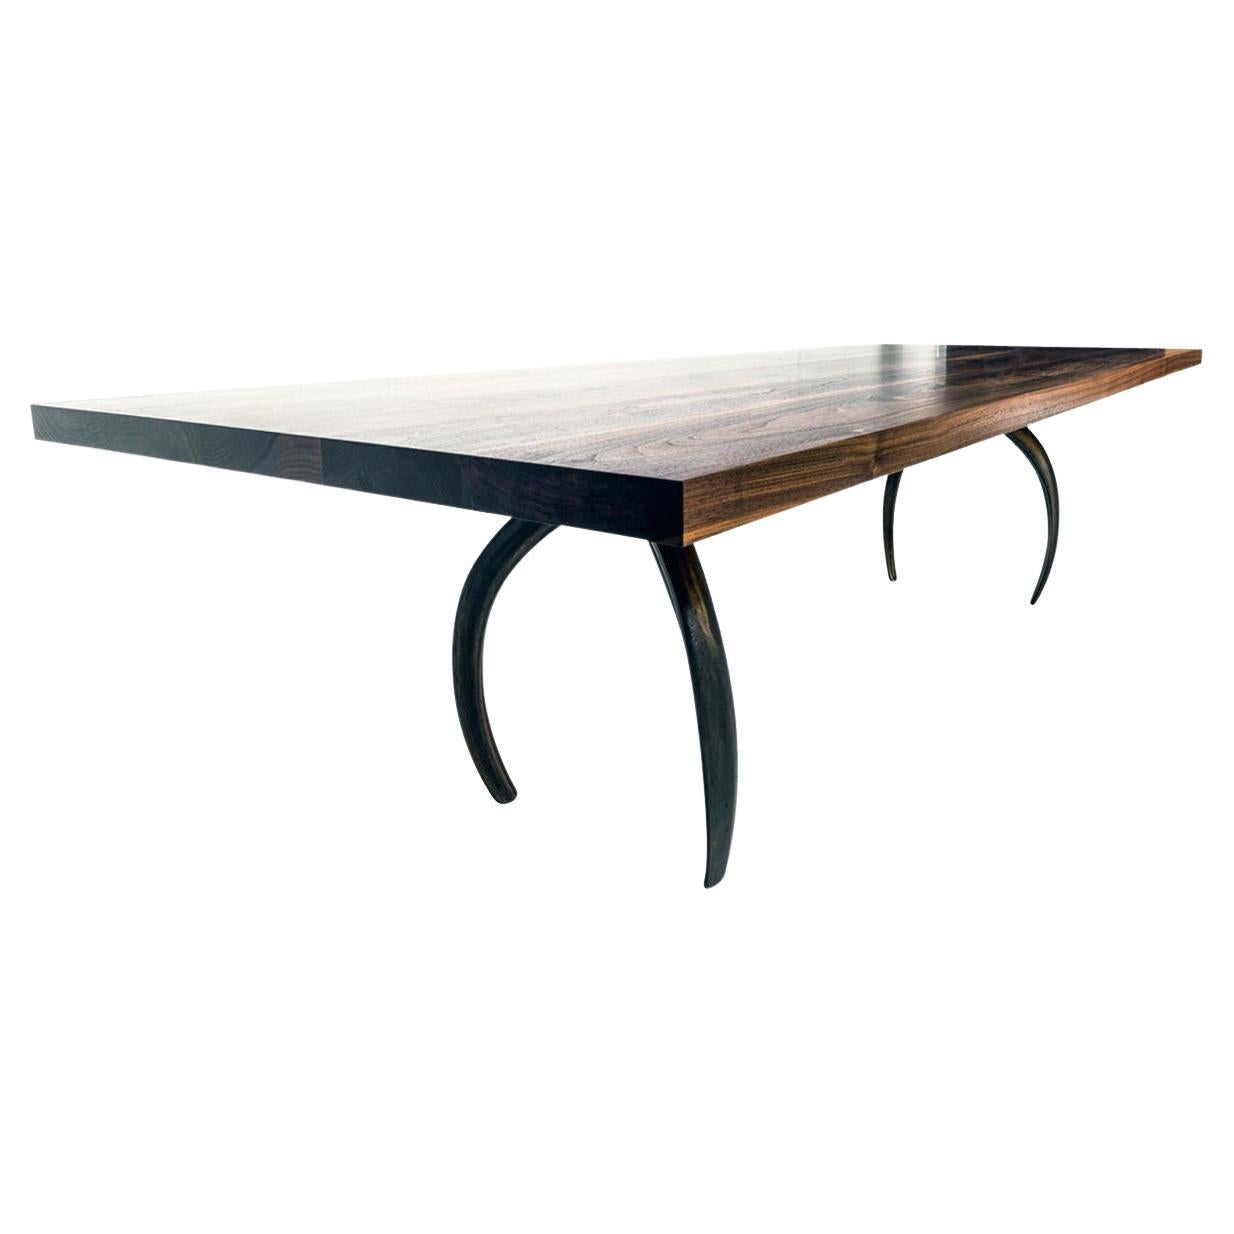 Stacklab Wishbone - 10 Seats, Dining Table, Joined Hardwood and Cast-Metal For Sale